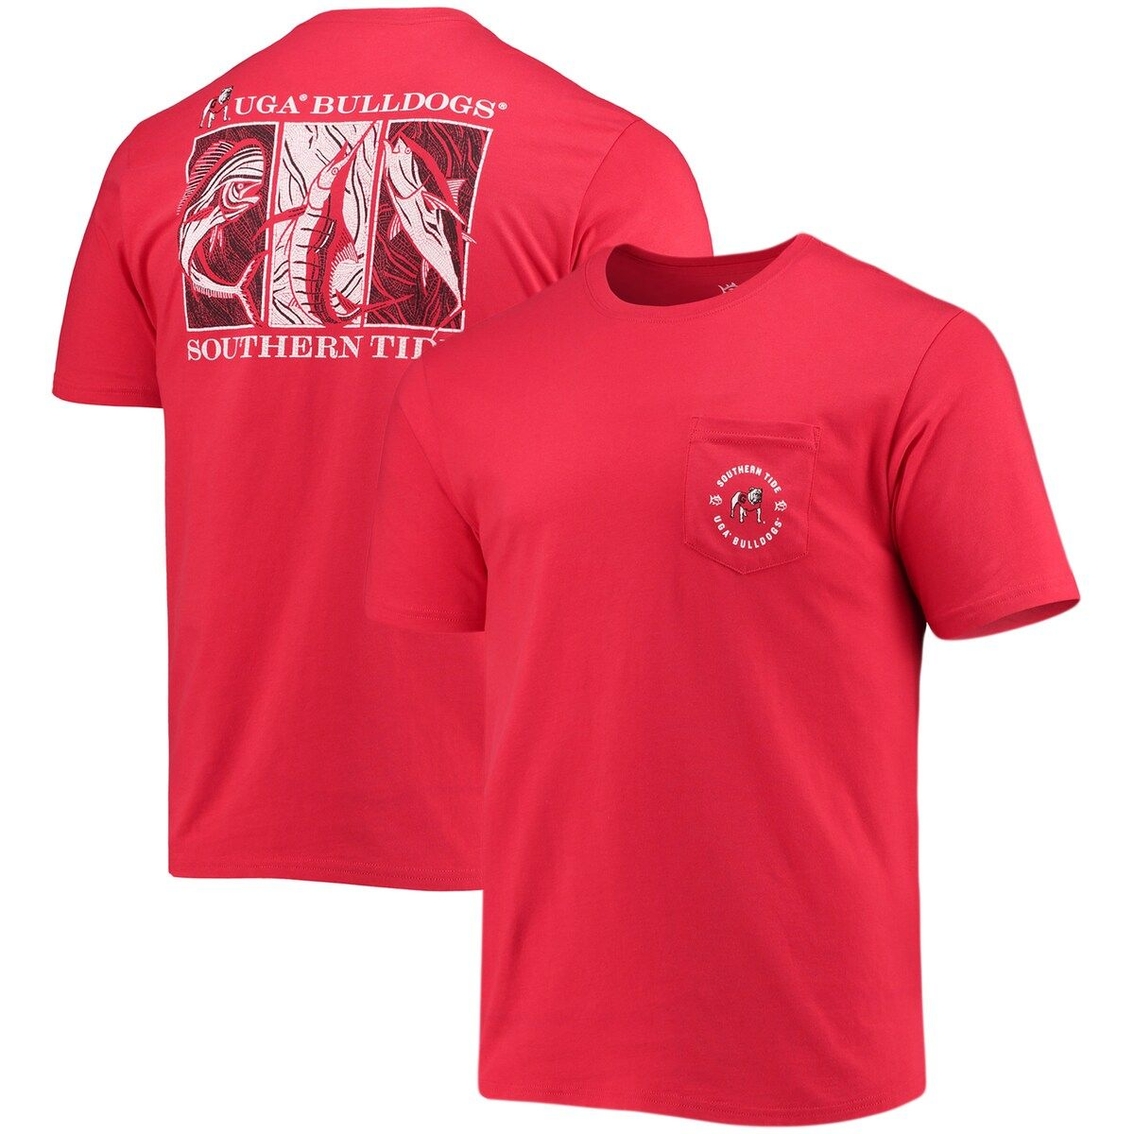 Southern Tide Men's Southern Tide Red Georgia Bulldogs Game Day Mosaic Fish T-Shirt - Image 2 of 4